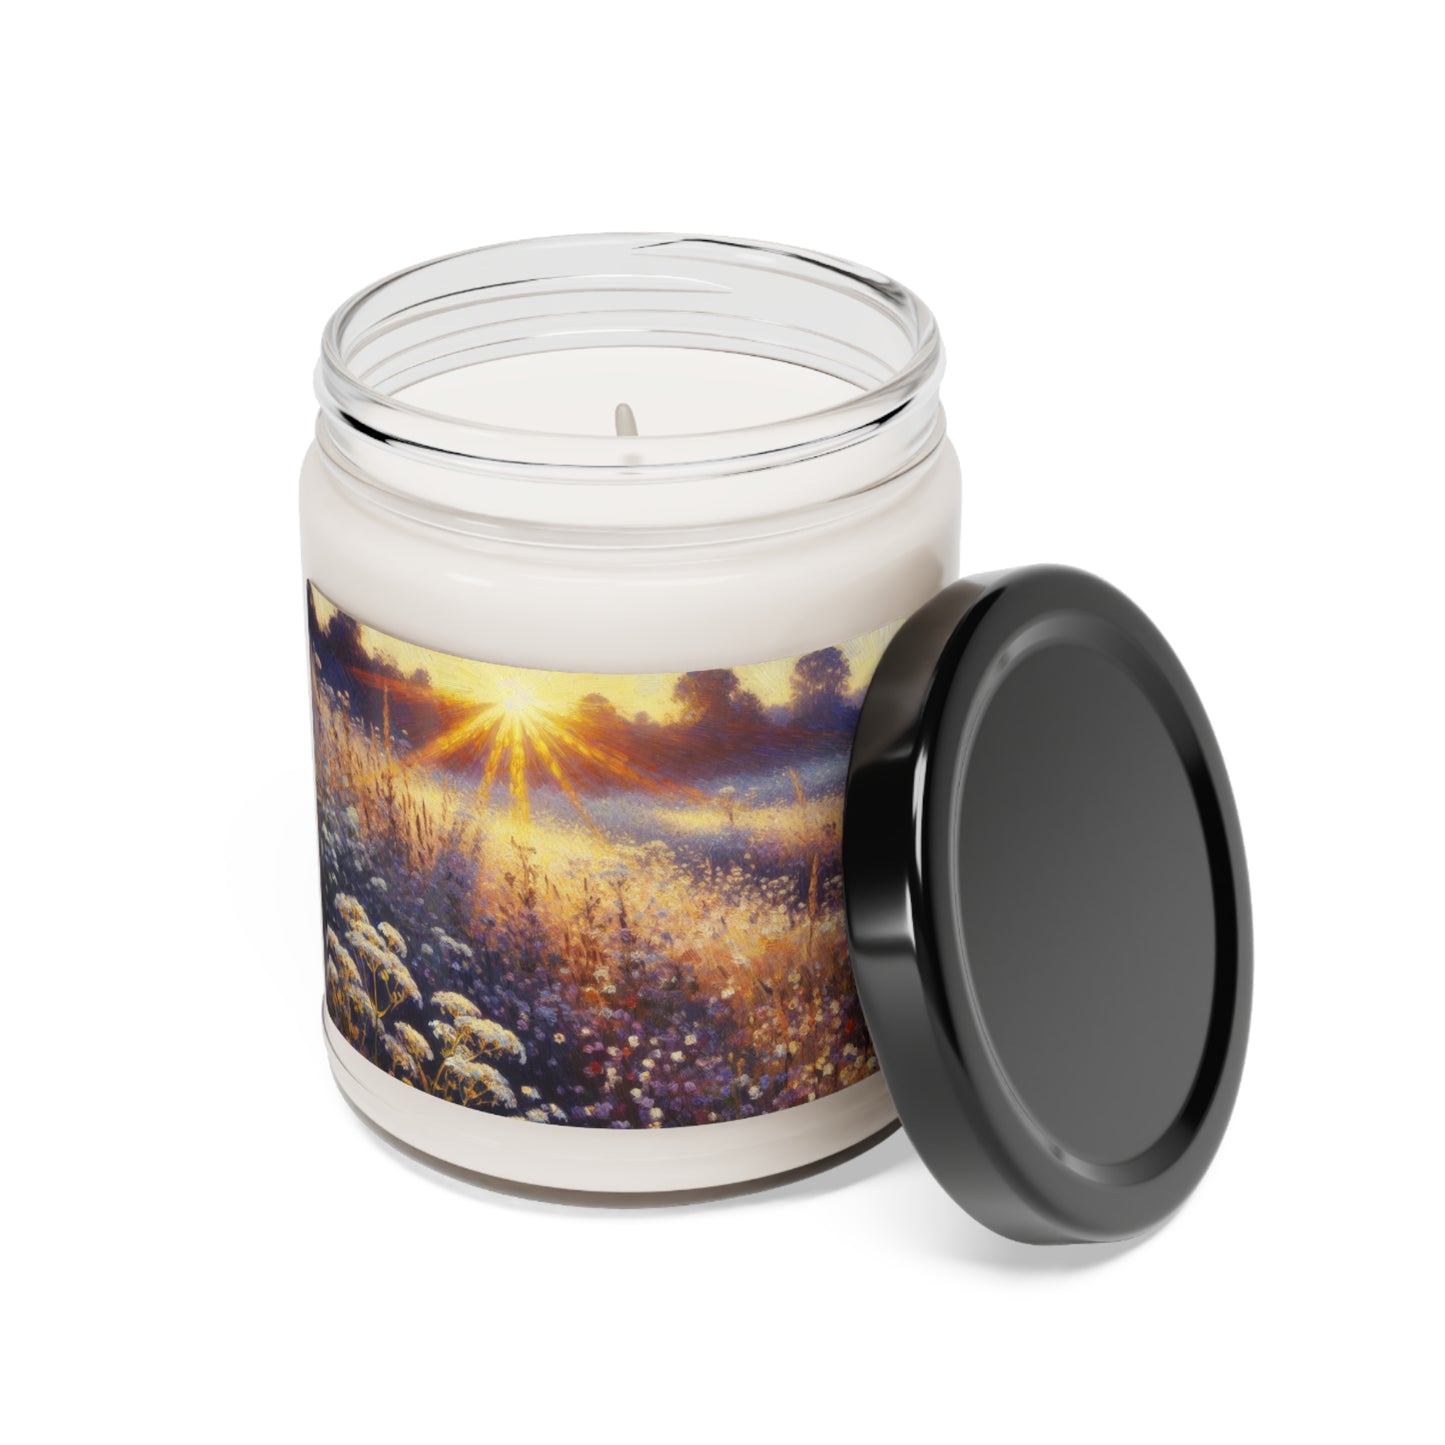 "Wildflower Sunrise" - The Alien Scented Soy Candle 9oz Impressionism Style